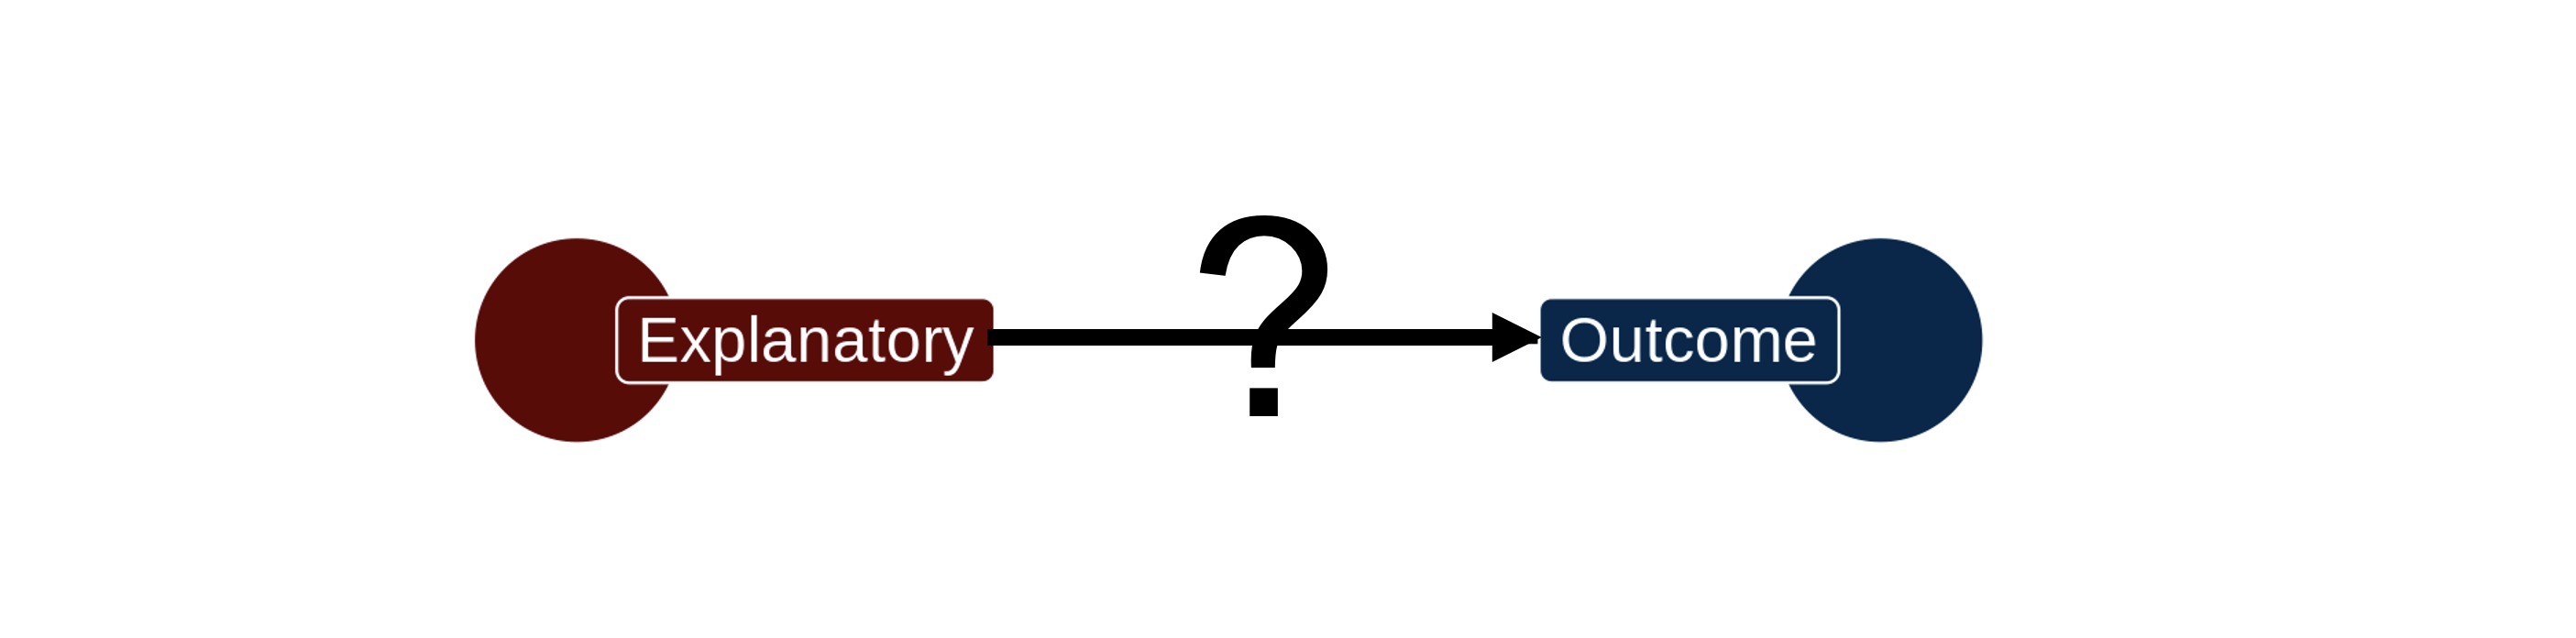 A circle on the left is labeled Explanatory with an arrow pointing from it to a circle on the right labeled Outcome. A question mark lies in the middle of the path of the arrow.